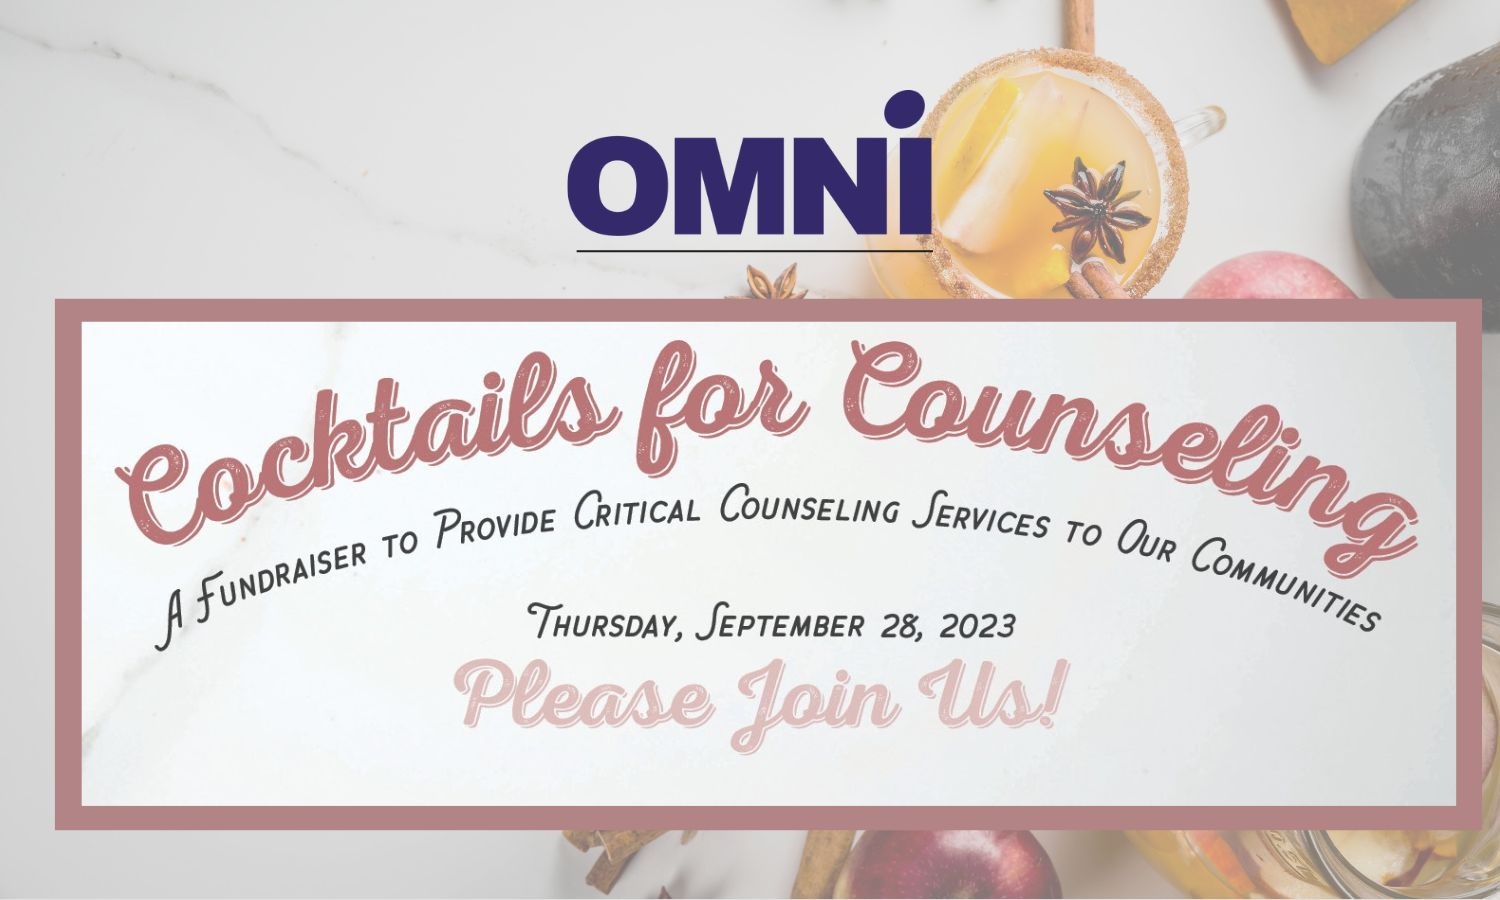 OMNI Fundraiser: Cocktails for Counseling